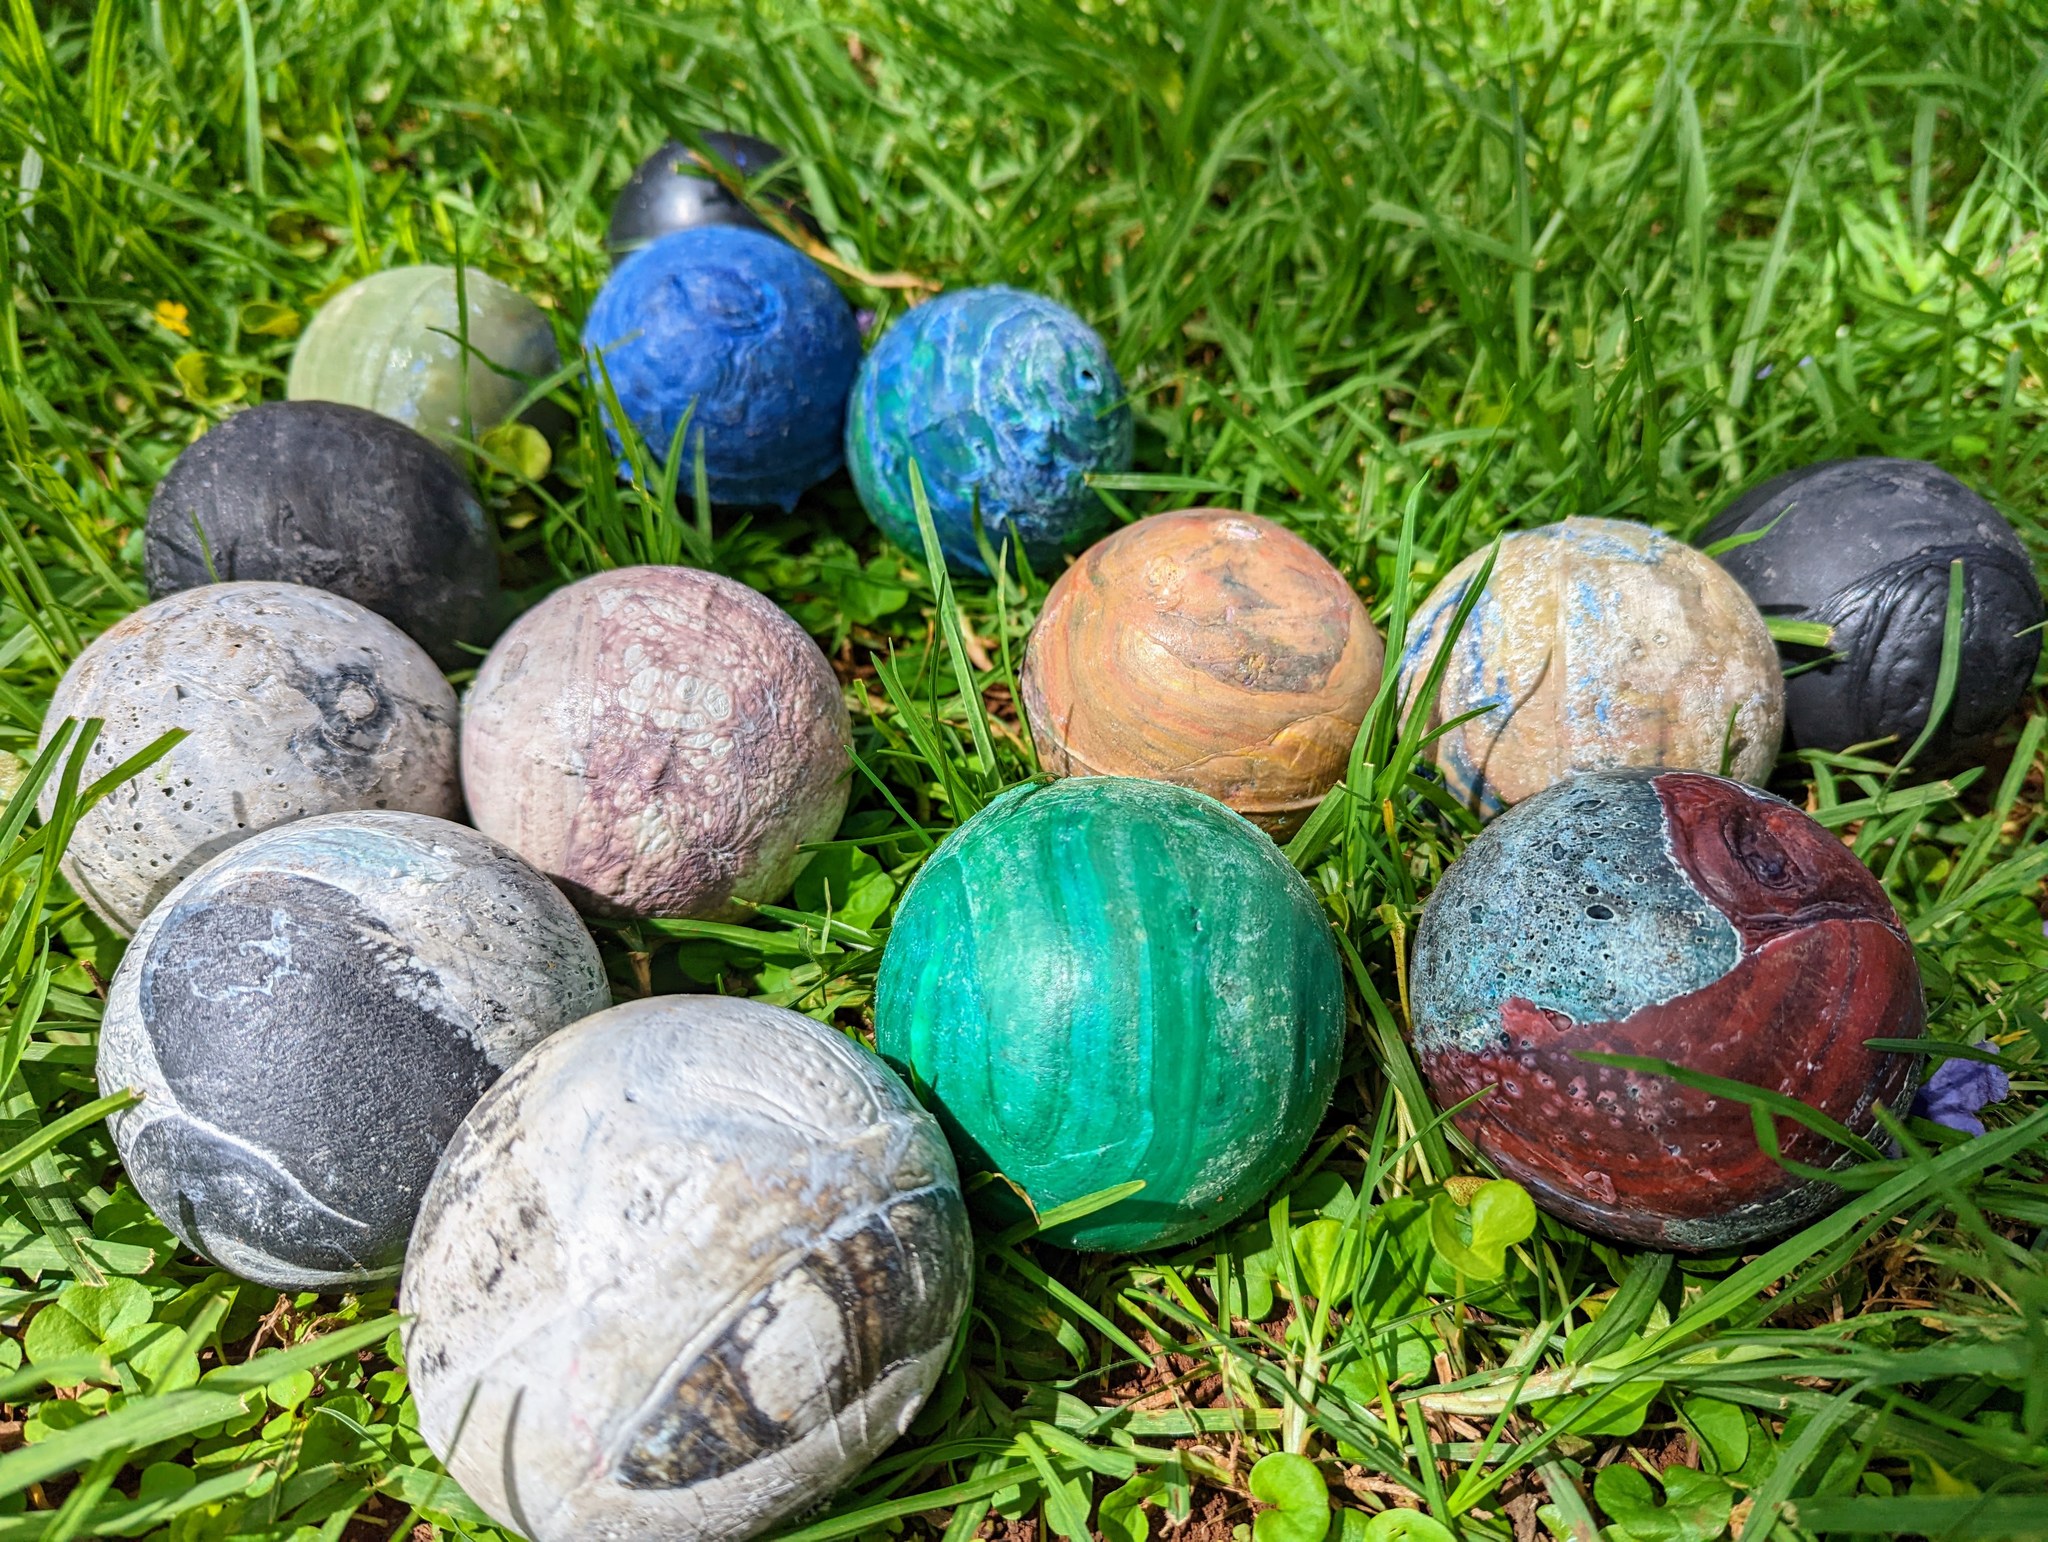 Check Out our Recycled Plastic Lawn Games!